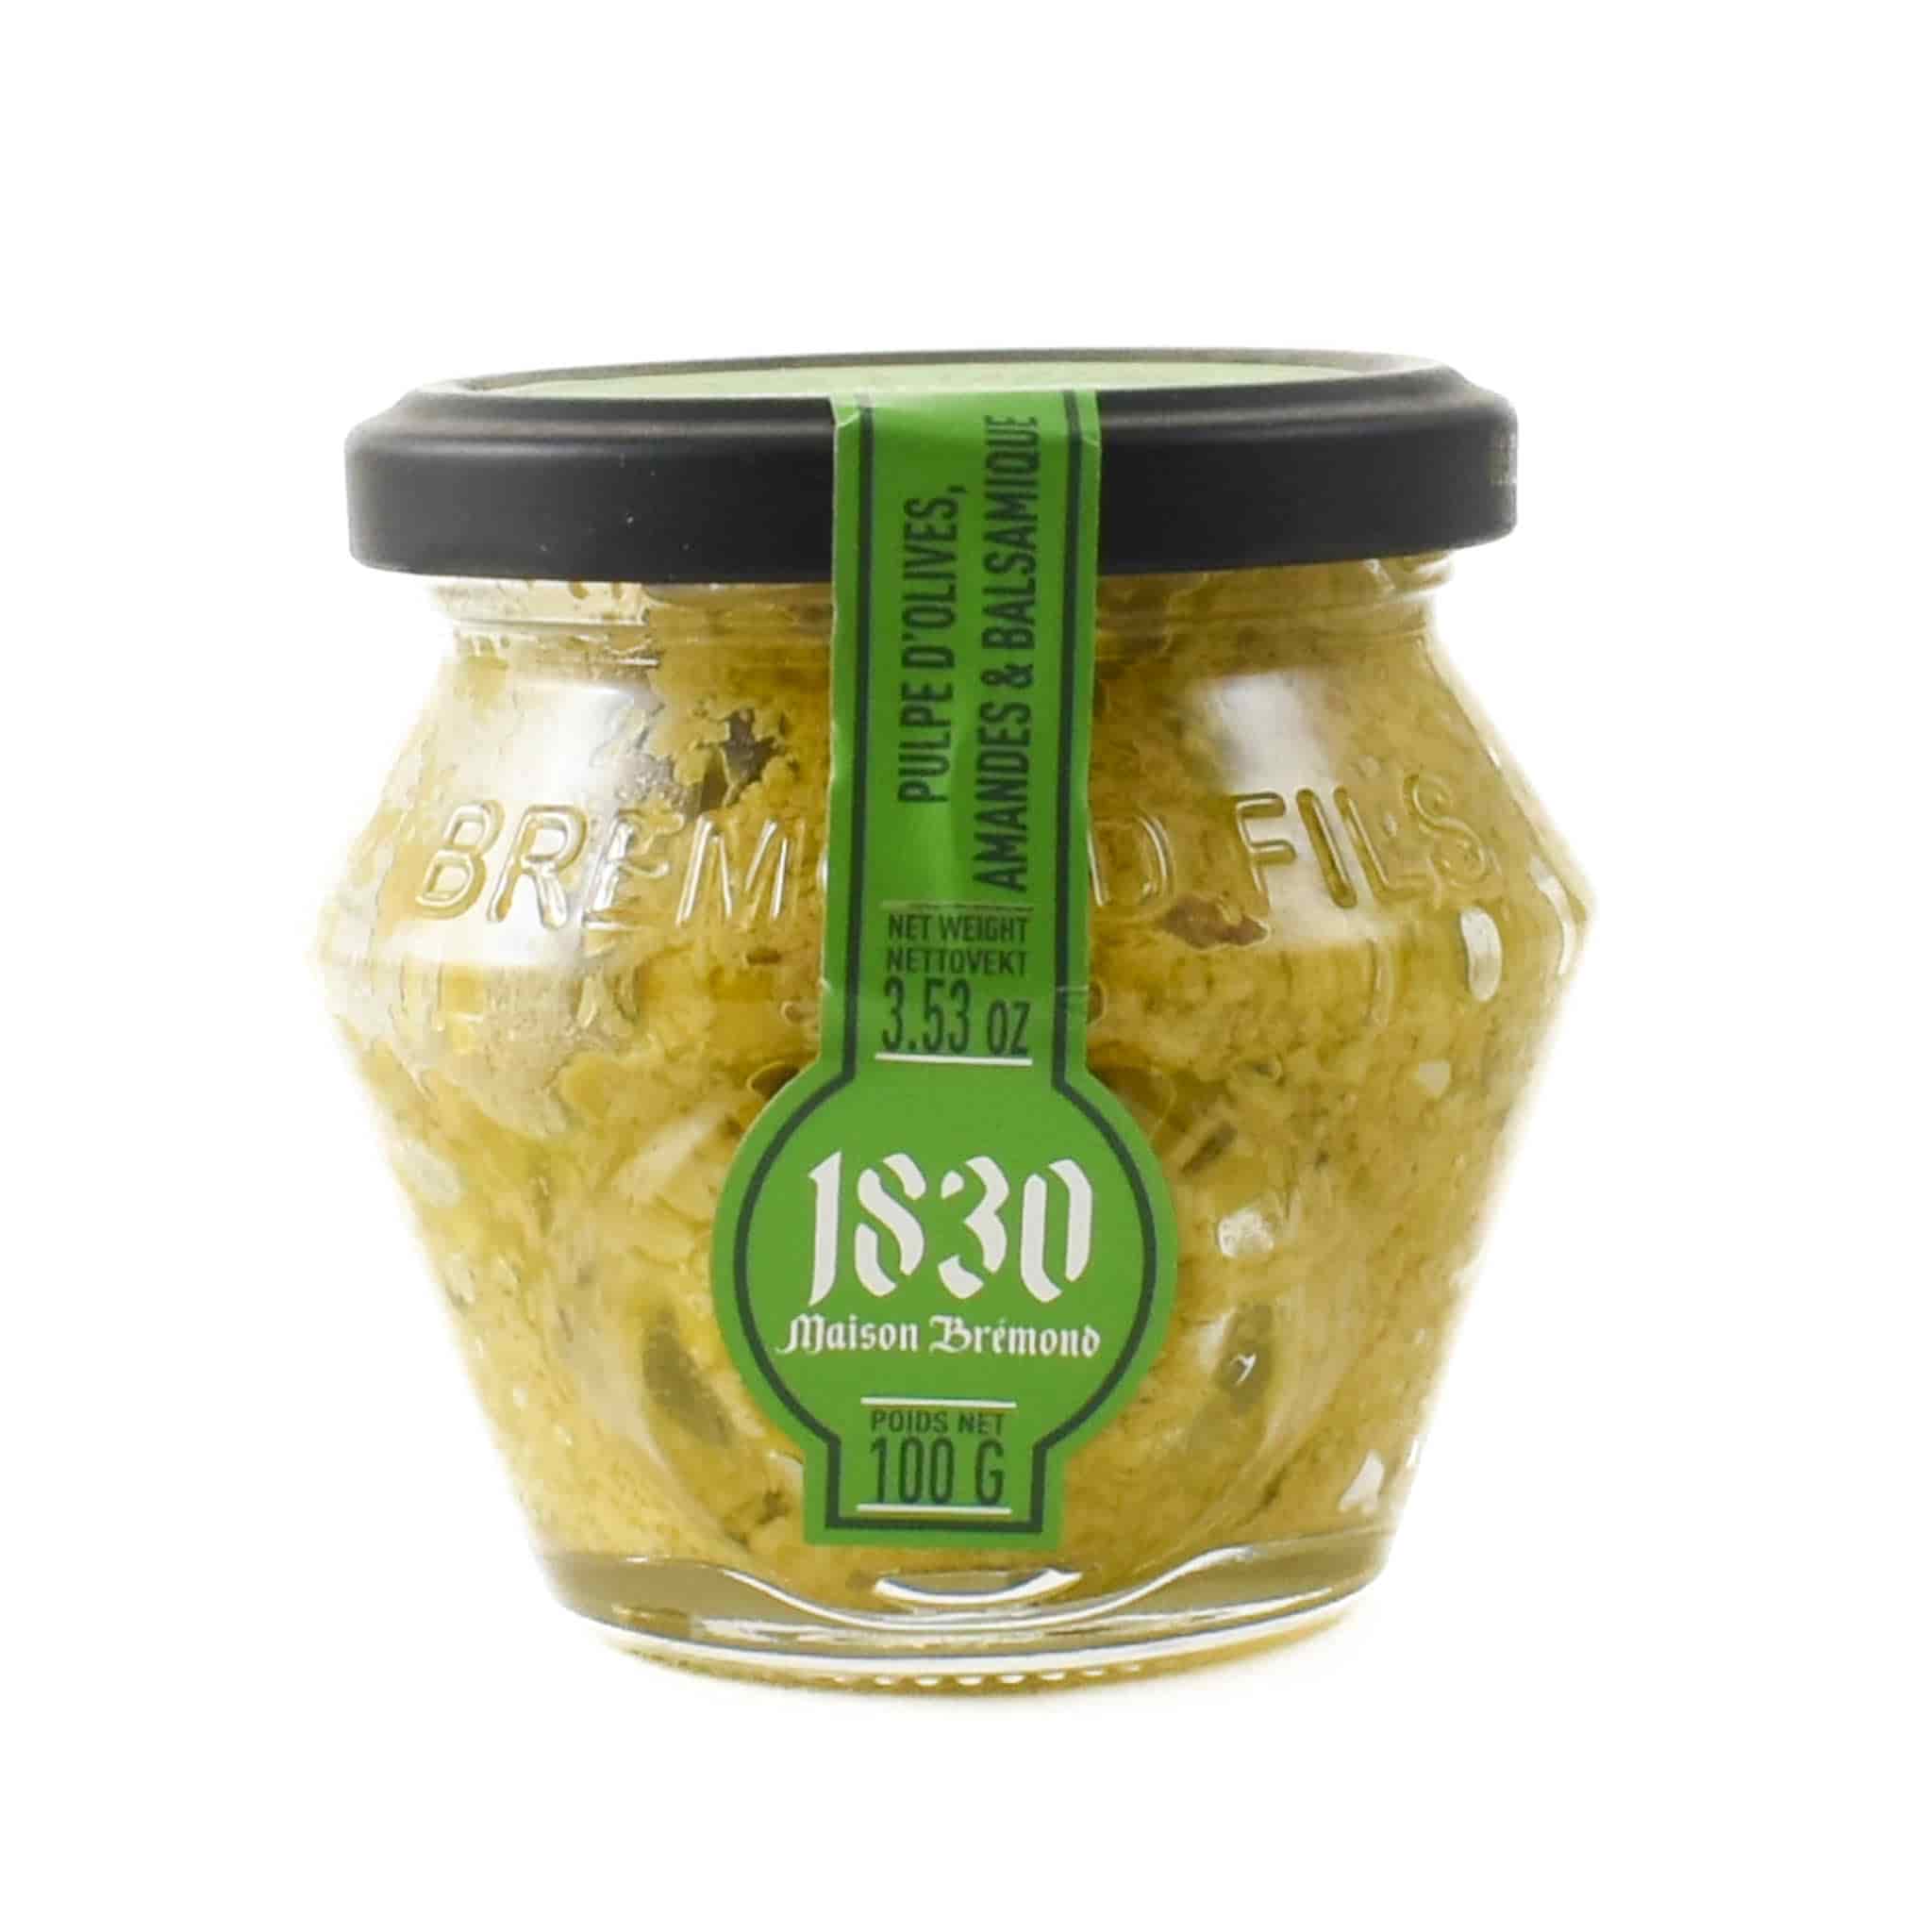 Maison Bremond Green Olive Tapenade with Grilled Almonds & White Balsamic Vinegar, 100g